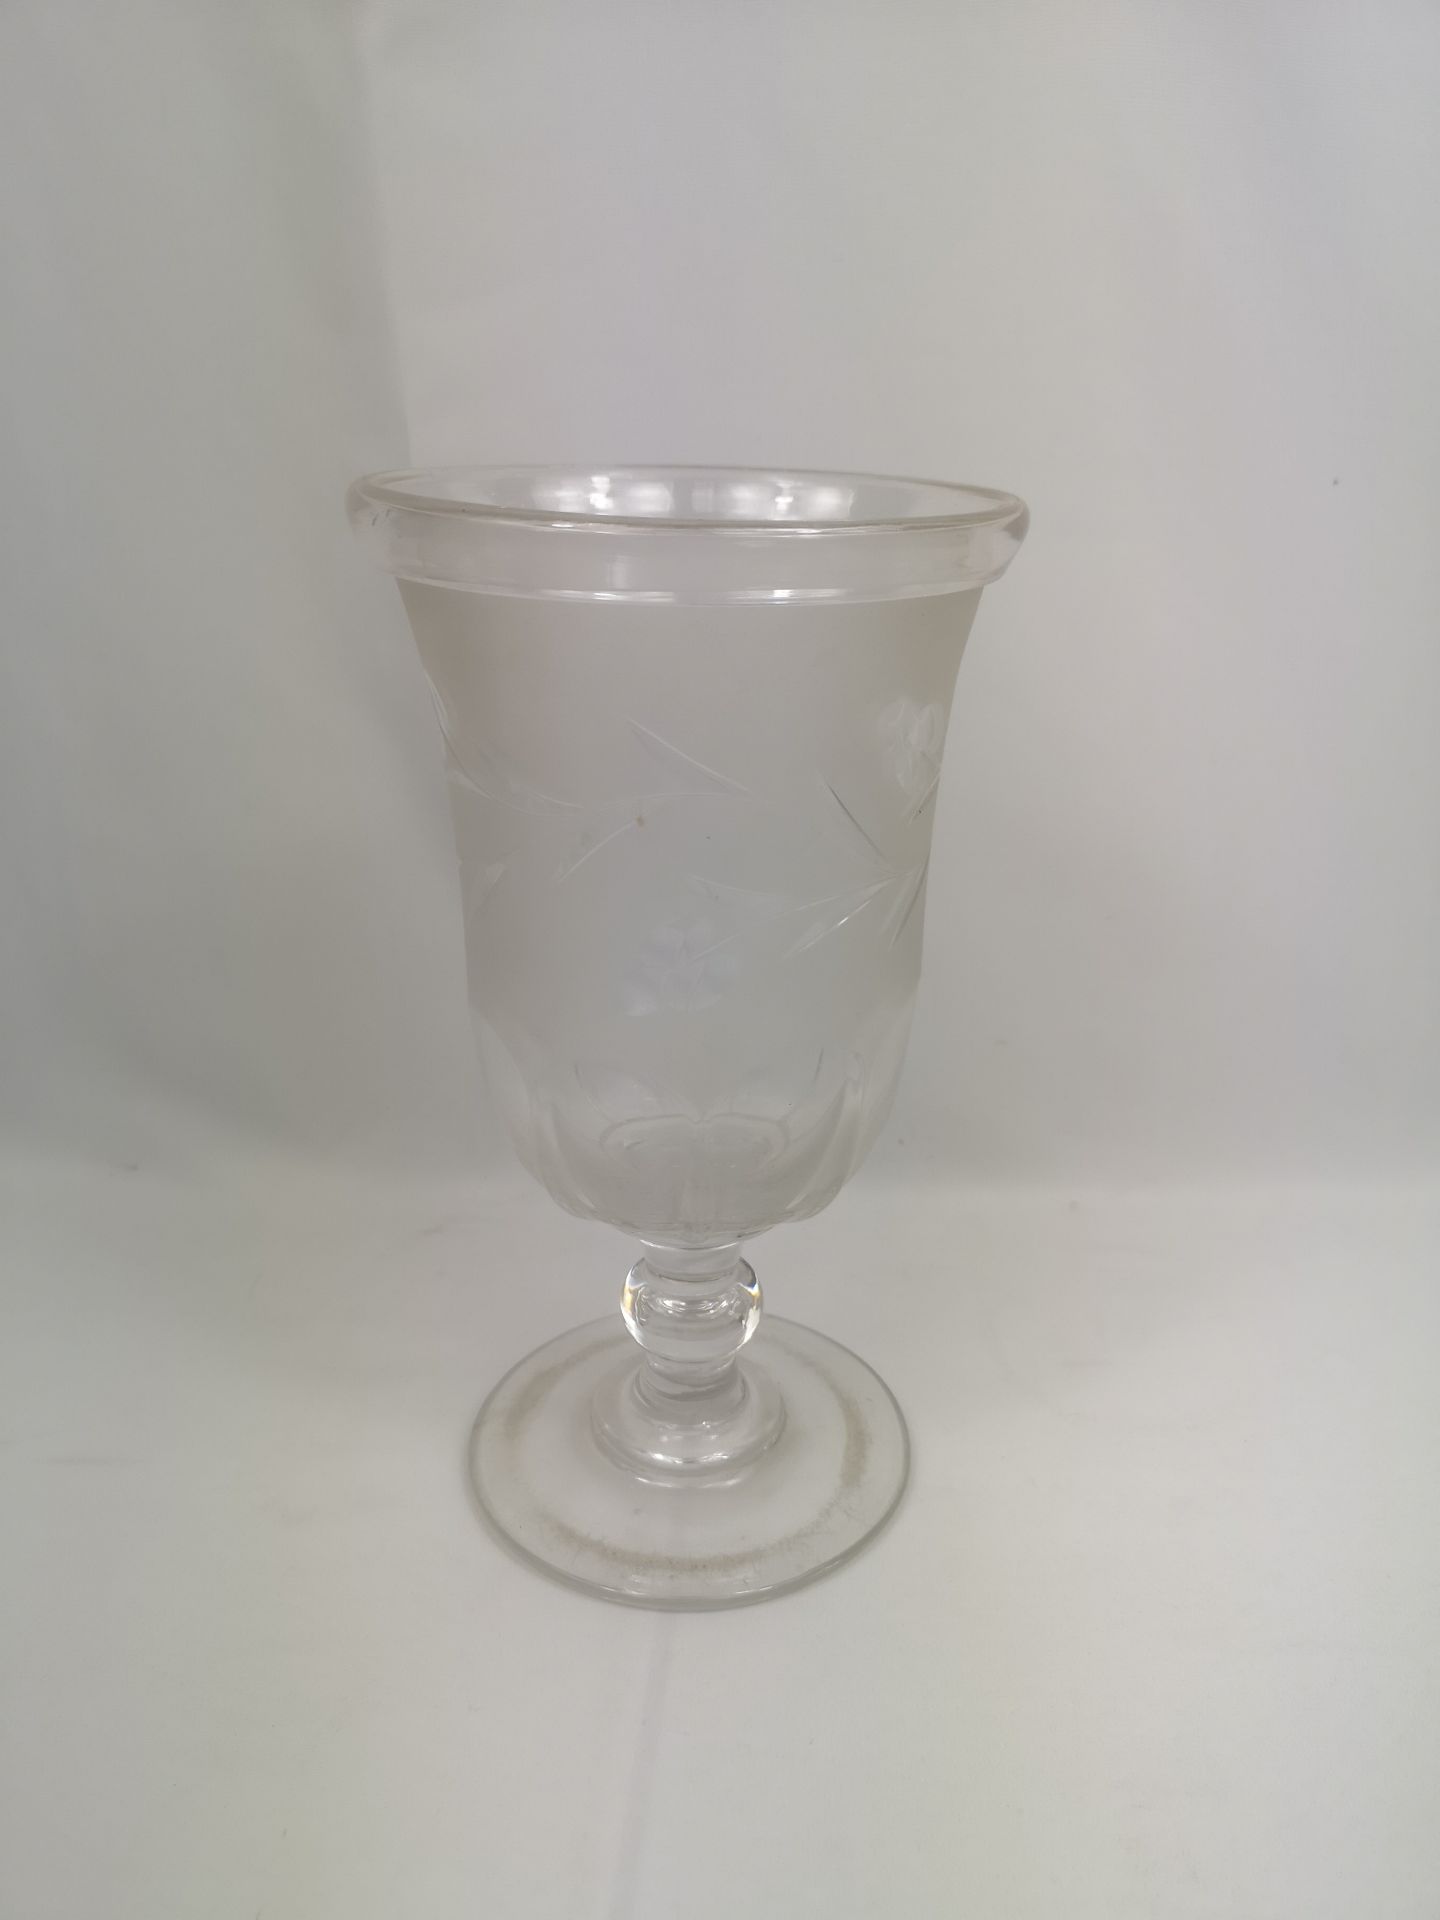 Two cut glass vases on pedestal bases - Image 6 of 6